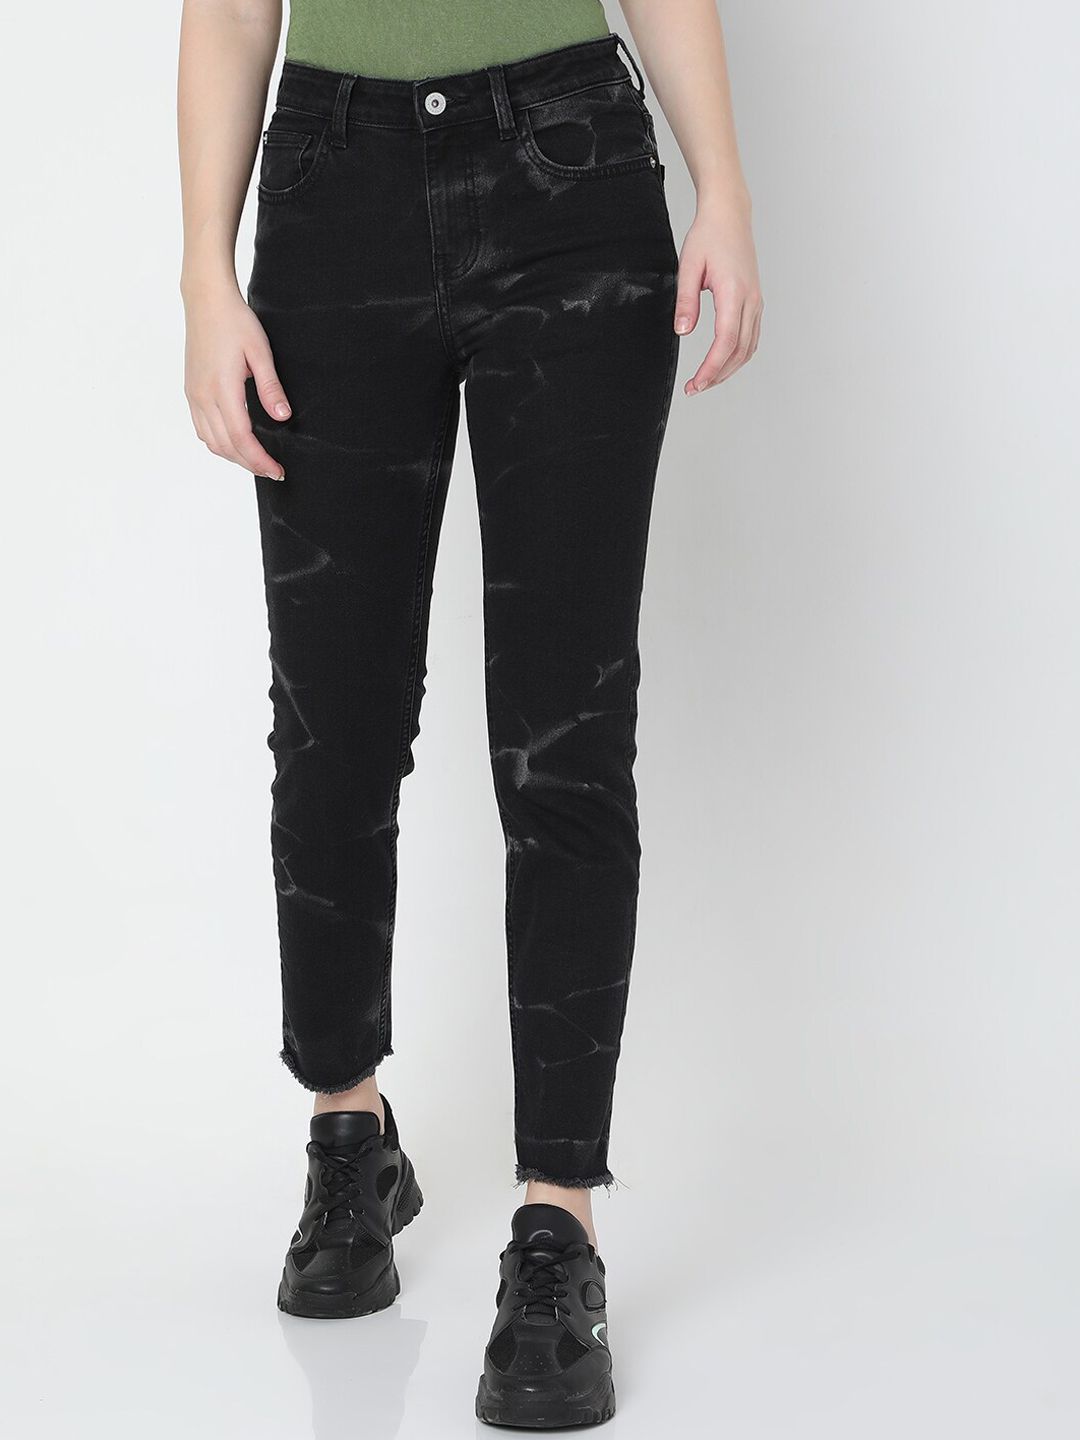 Vero Moda Women Black Straight Fit High-Rise Mildly Distressed Light Fade Stretchable Jeans Price in India